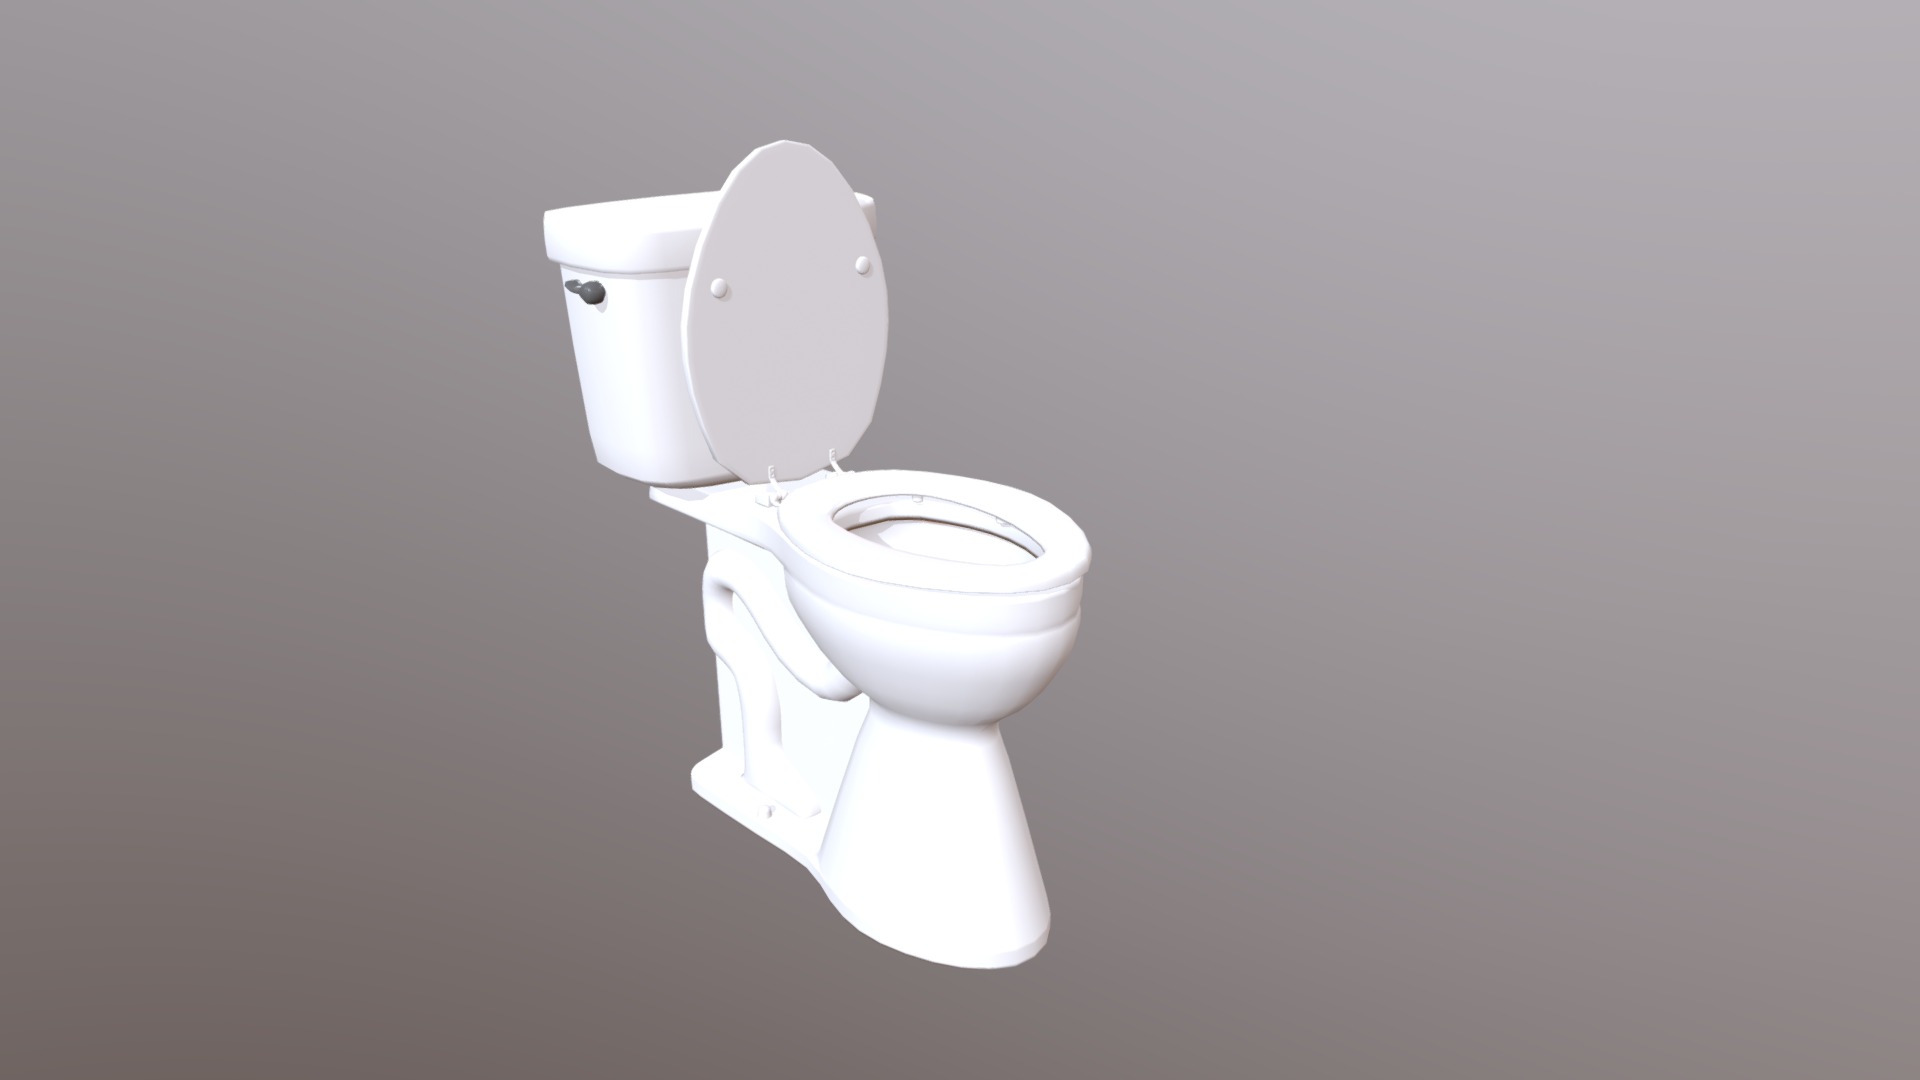 3D model Toilet - This is a 3D model of the Toilet. The 3D model is about a toilet paper holder.